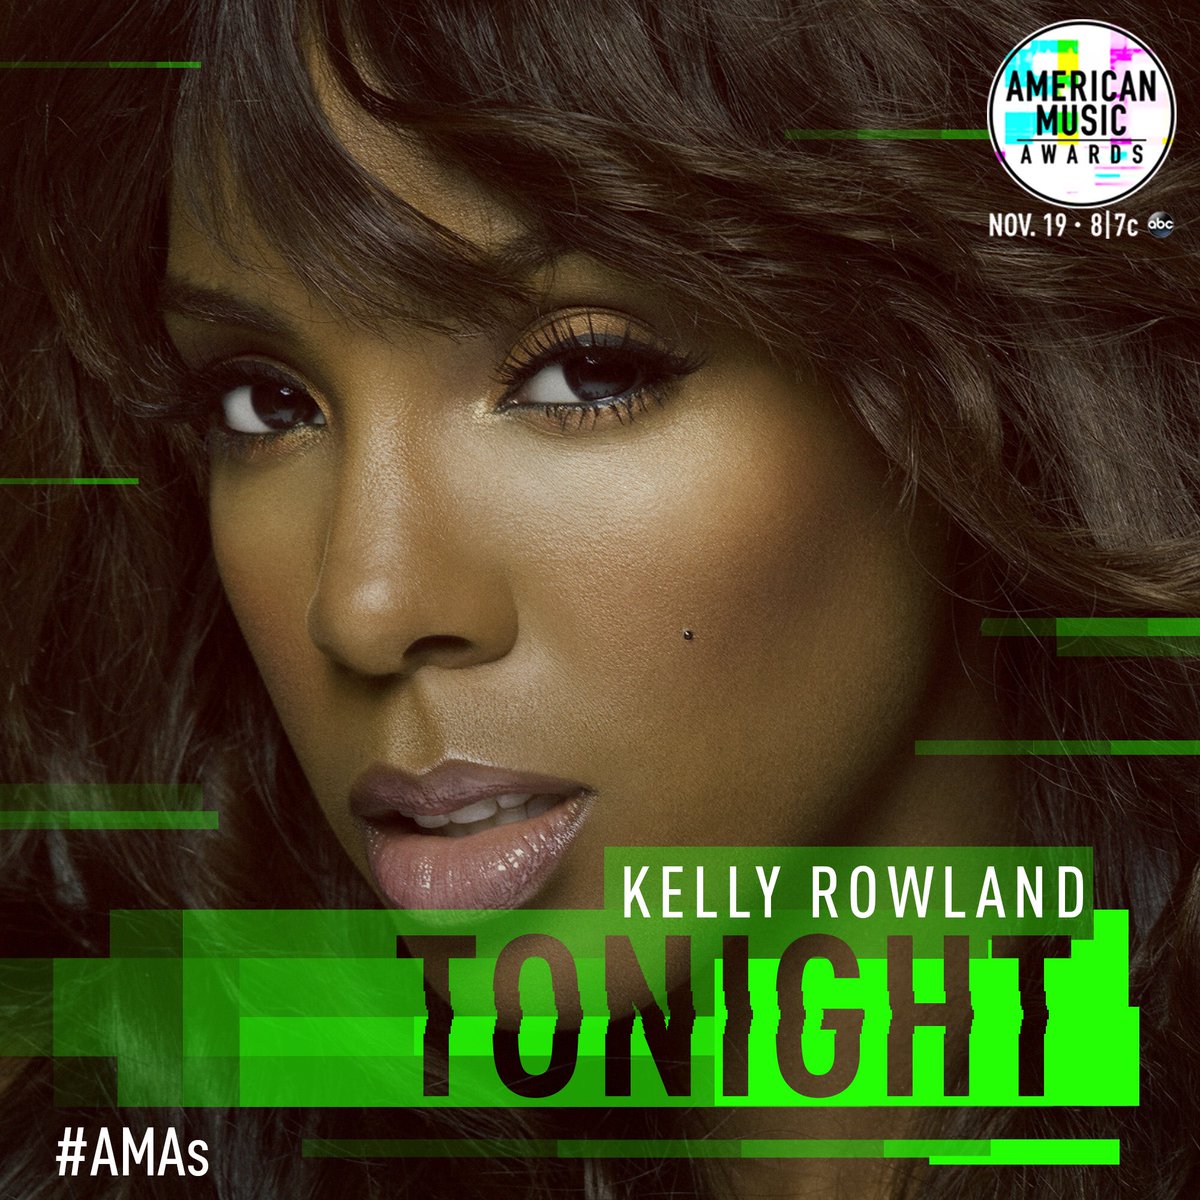 I'm SO EXCITED to present at the @AMAs TONIGHT! It's going to be amazing. LIVE at 8/7c on @ABCNetwork! #AMAs https://t.co/icHjT8KyCu